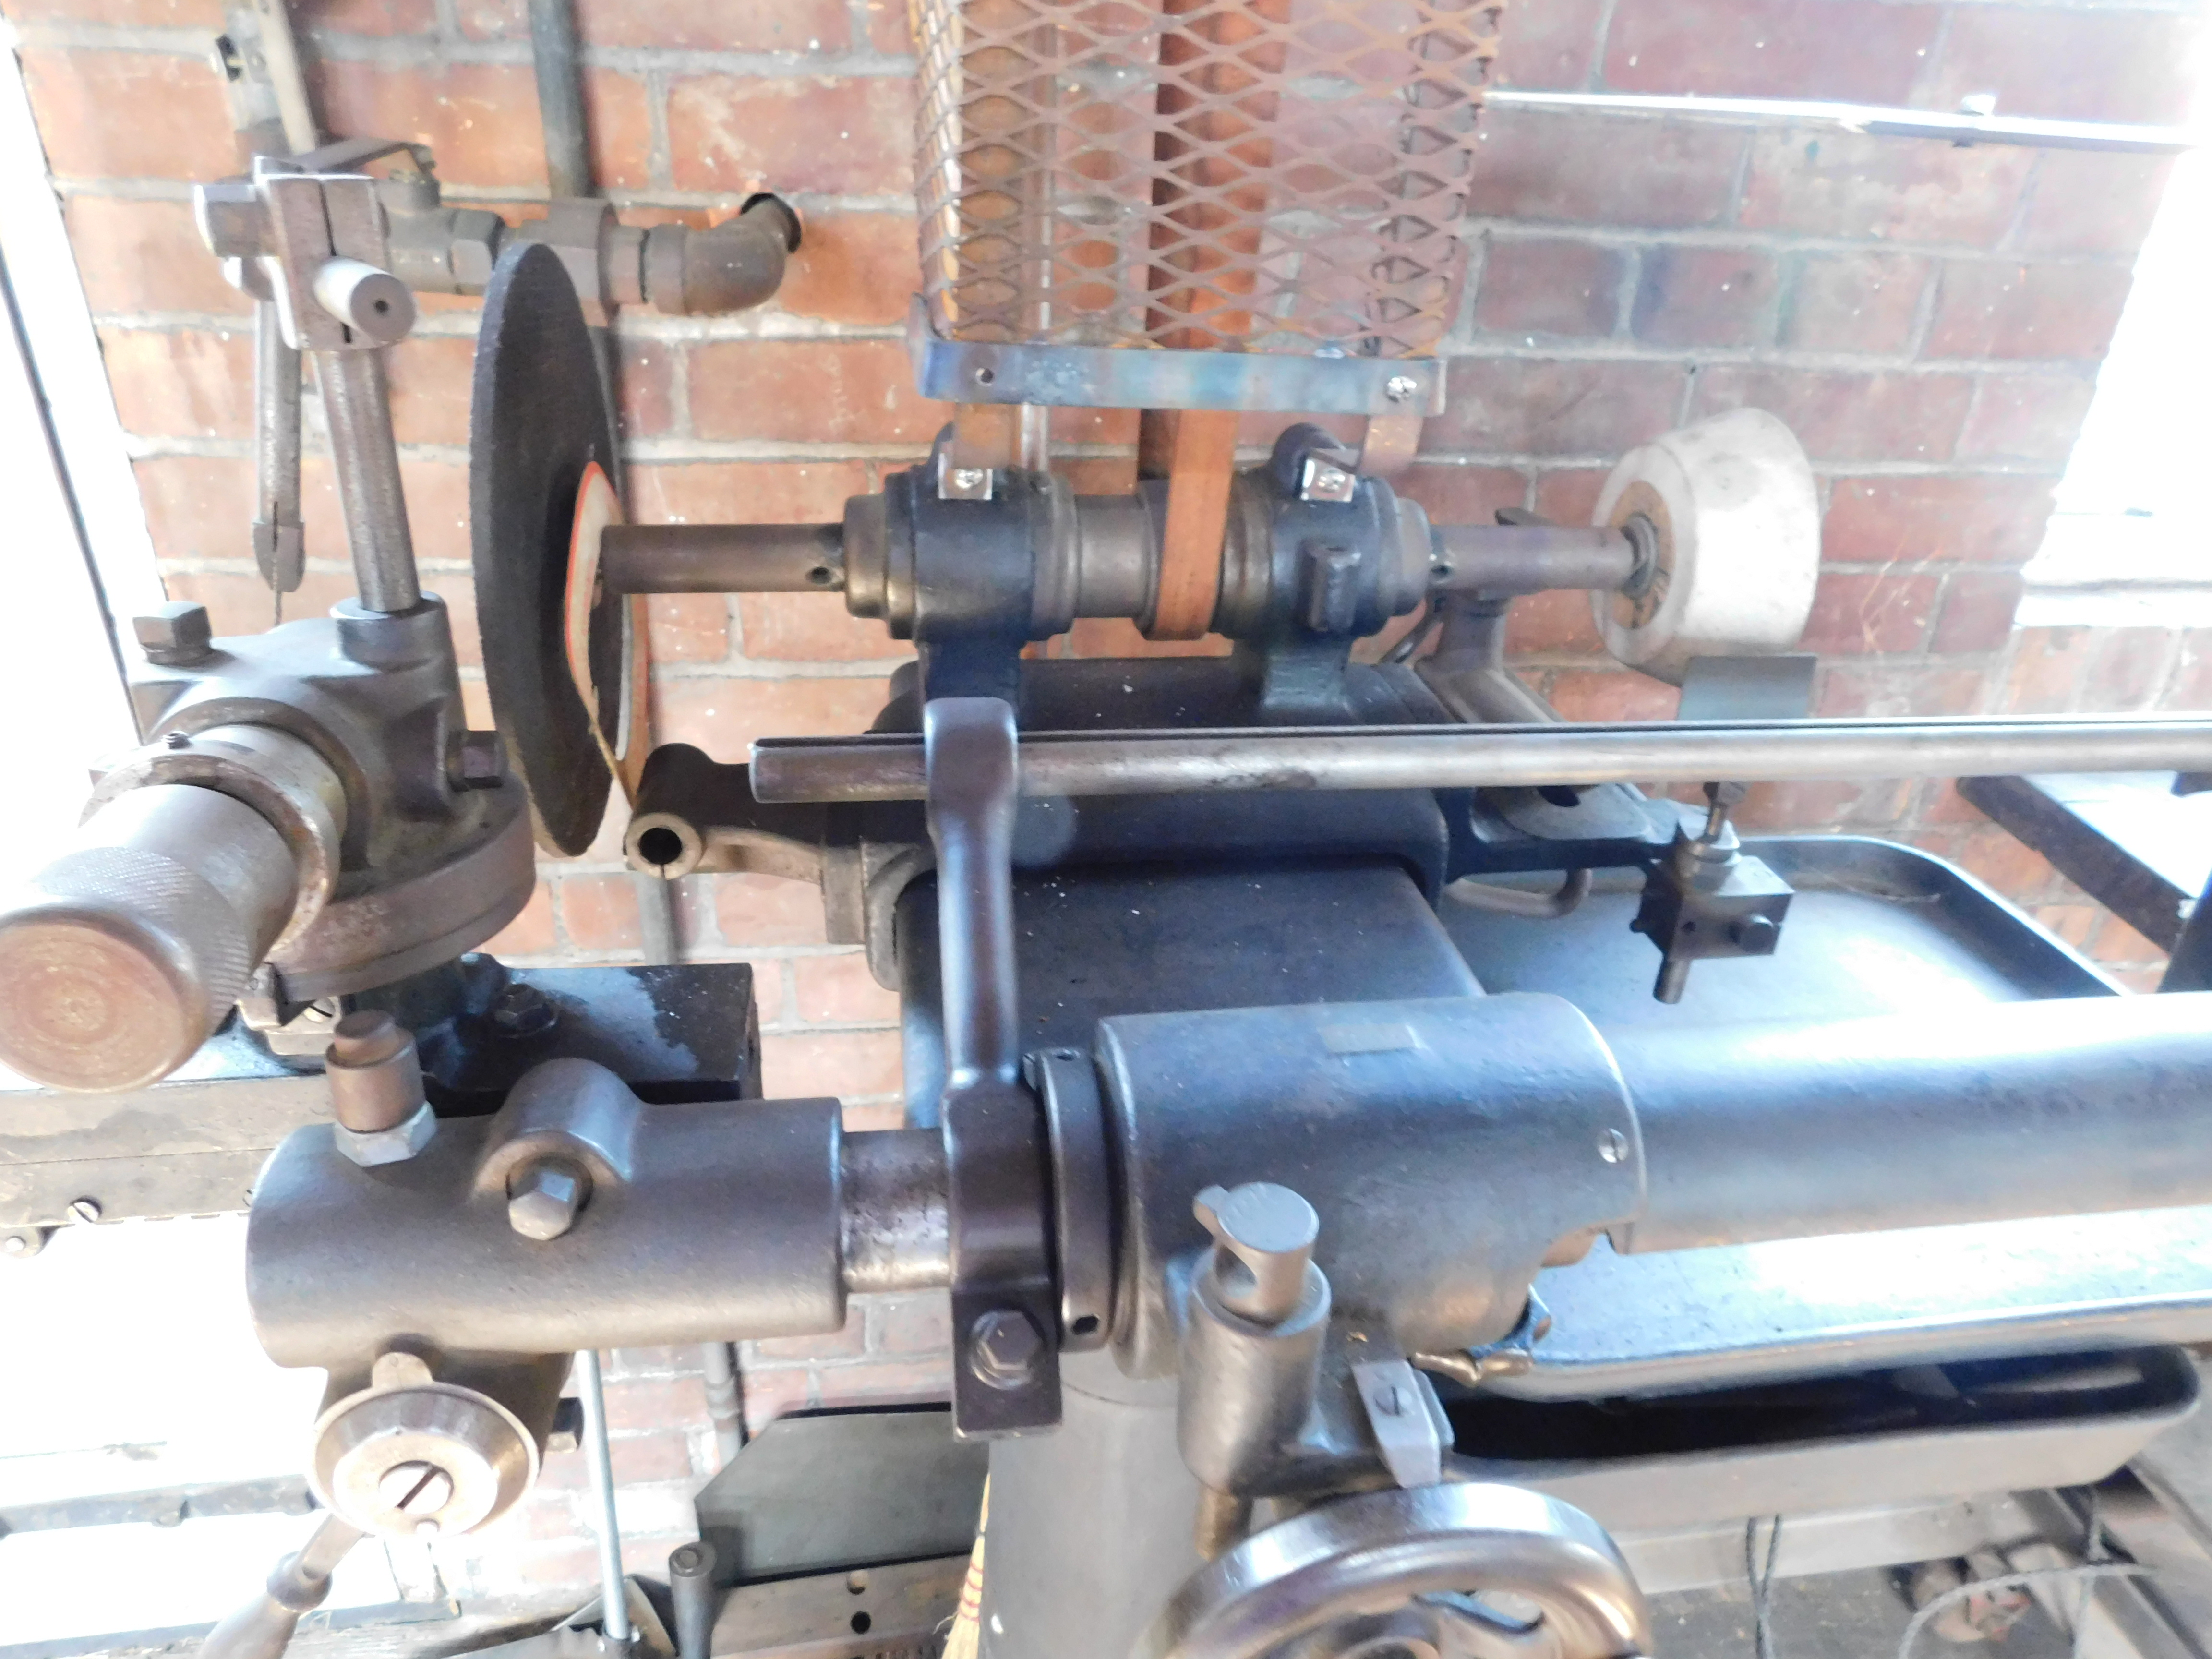   https://antiquemachinery.com/images-HFM/Arlington-and-Sims-Machine-Shop-Edison-Henry-Ford-Museum-DSCN1382-Brown-and-Sharpe-Cutter-Grinder-no-2.JPG  